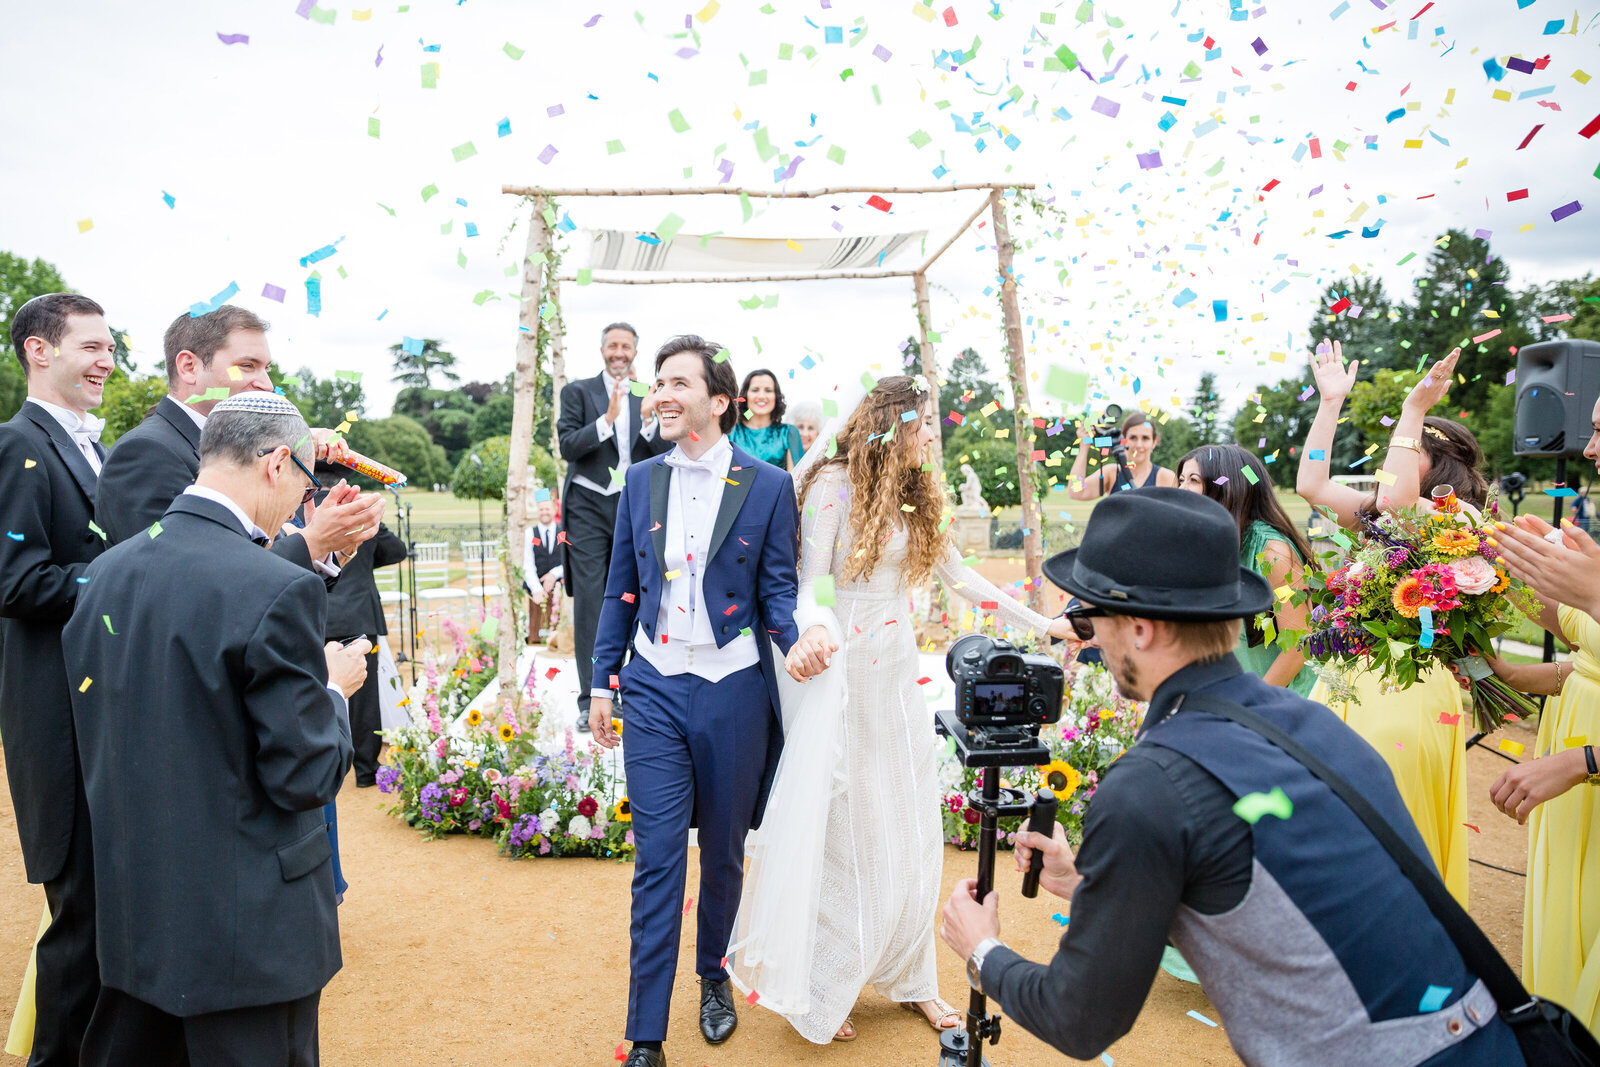 The Bride and Groom leave the ceremony as guests throw confetti